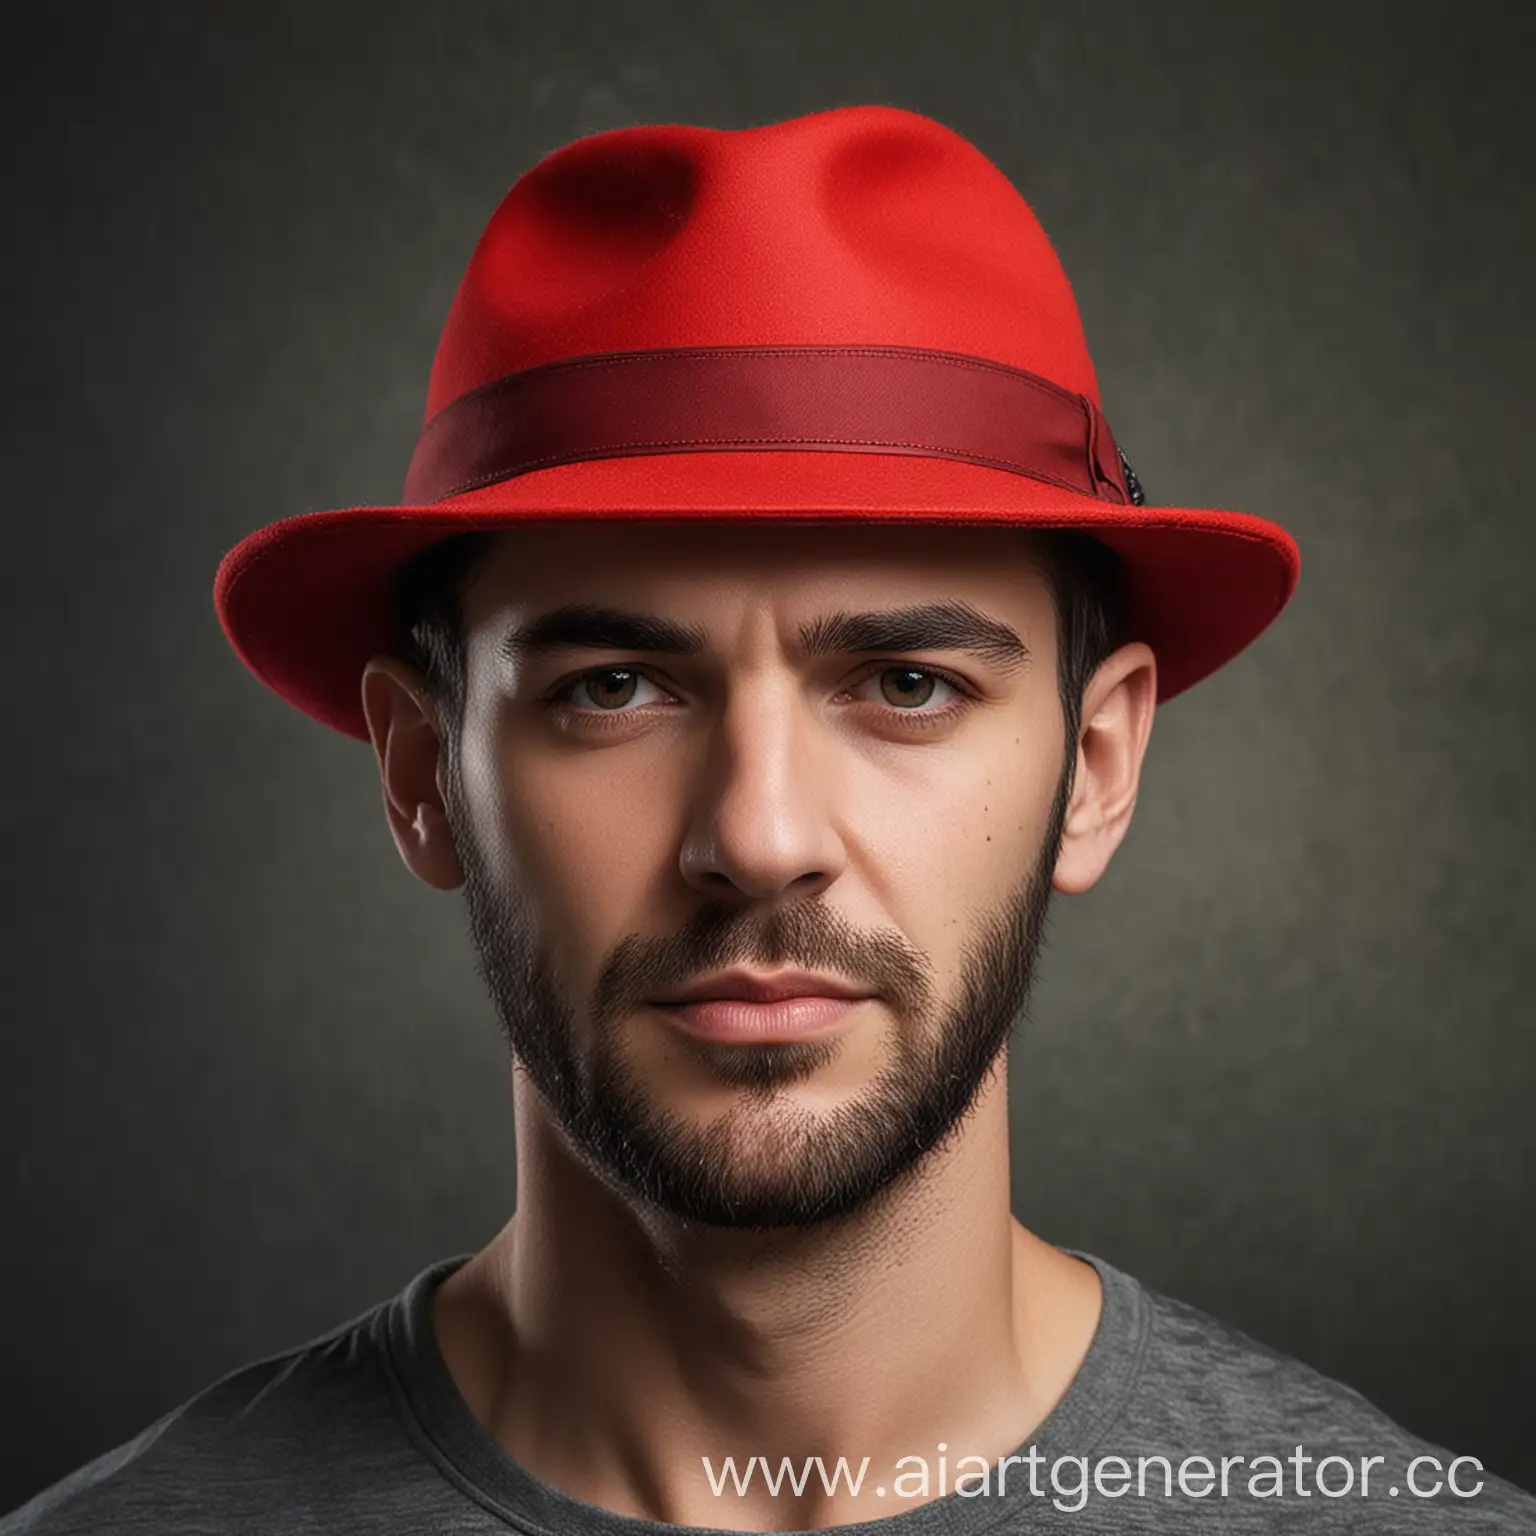 man in red hat
